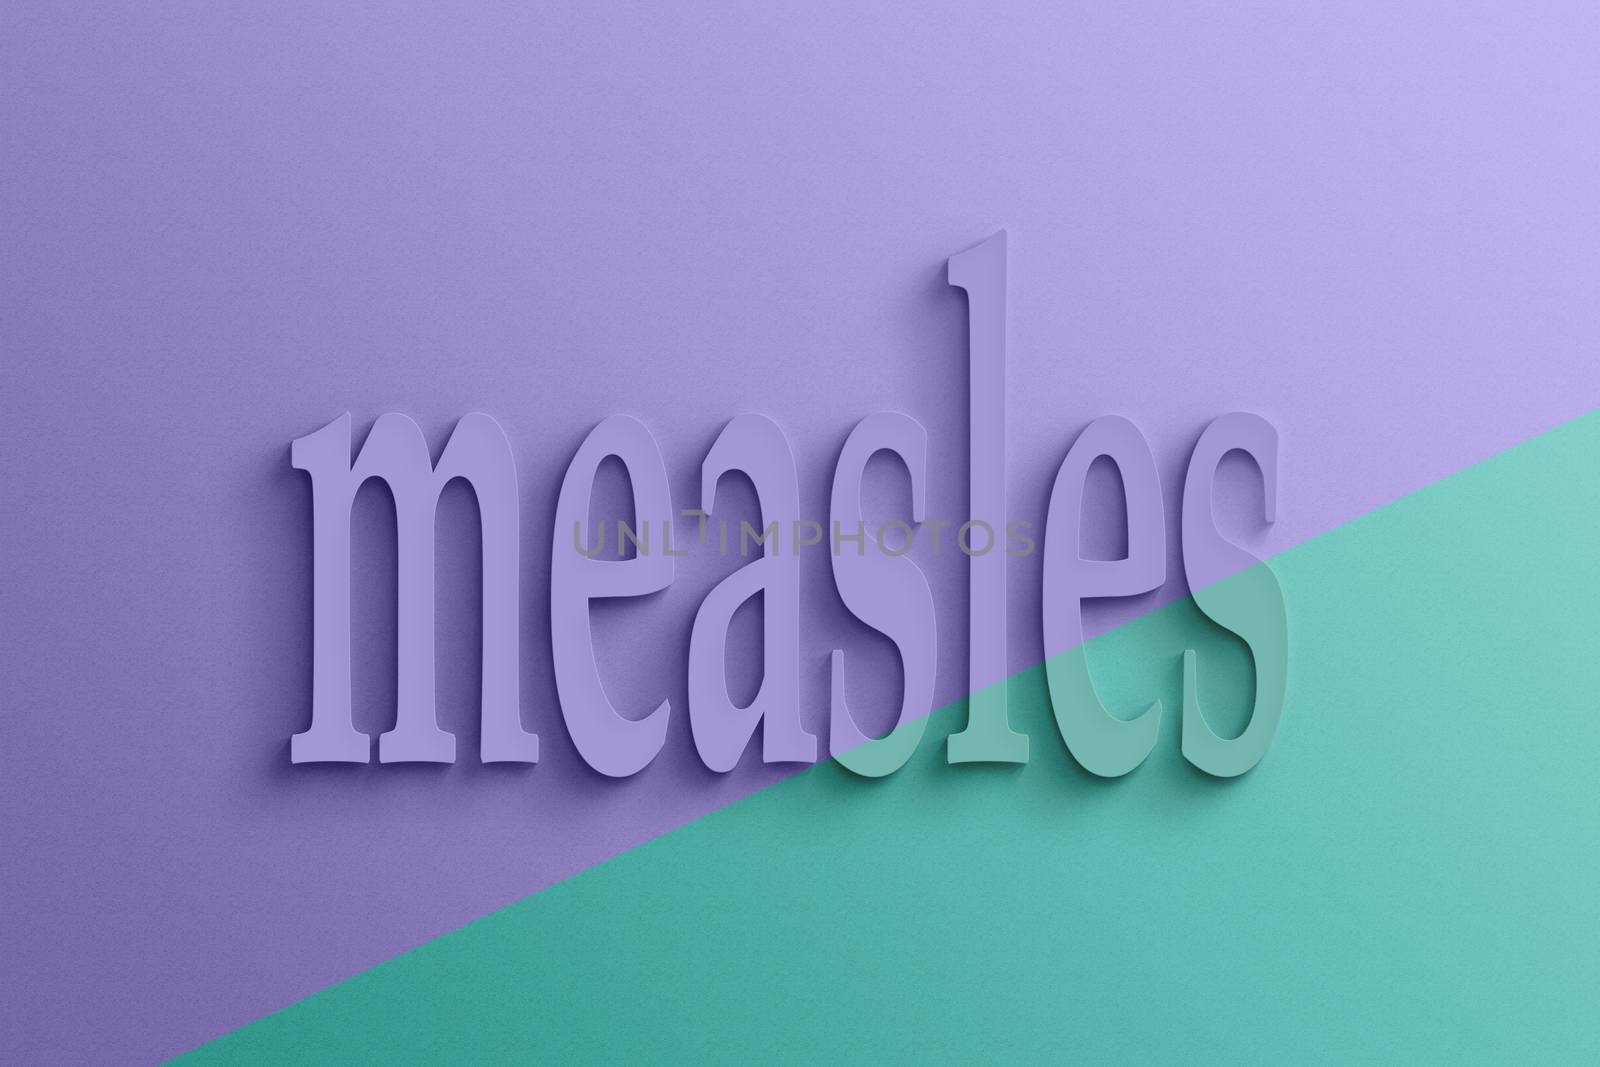 3D text with shadow and reflection, measles.